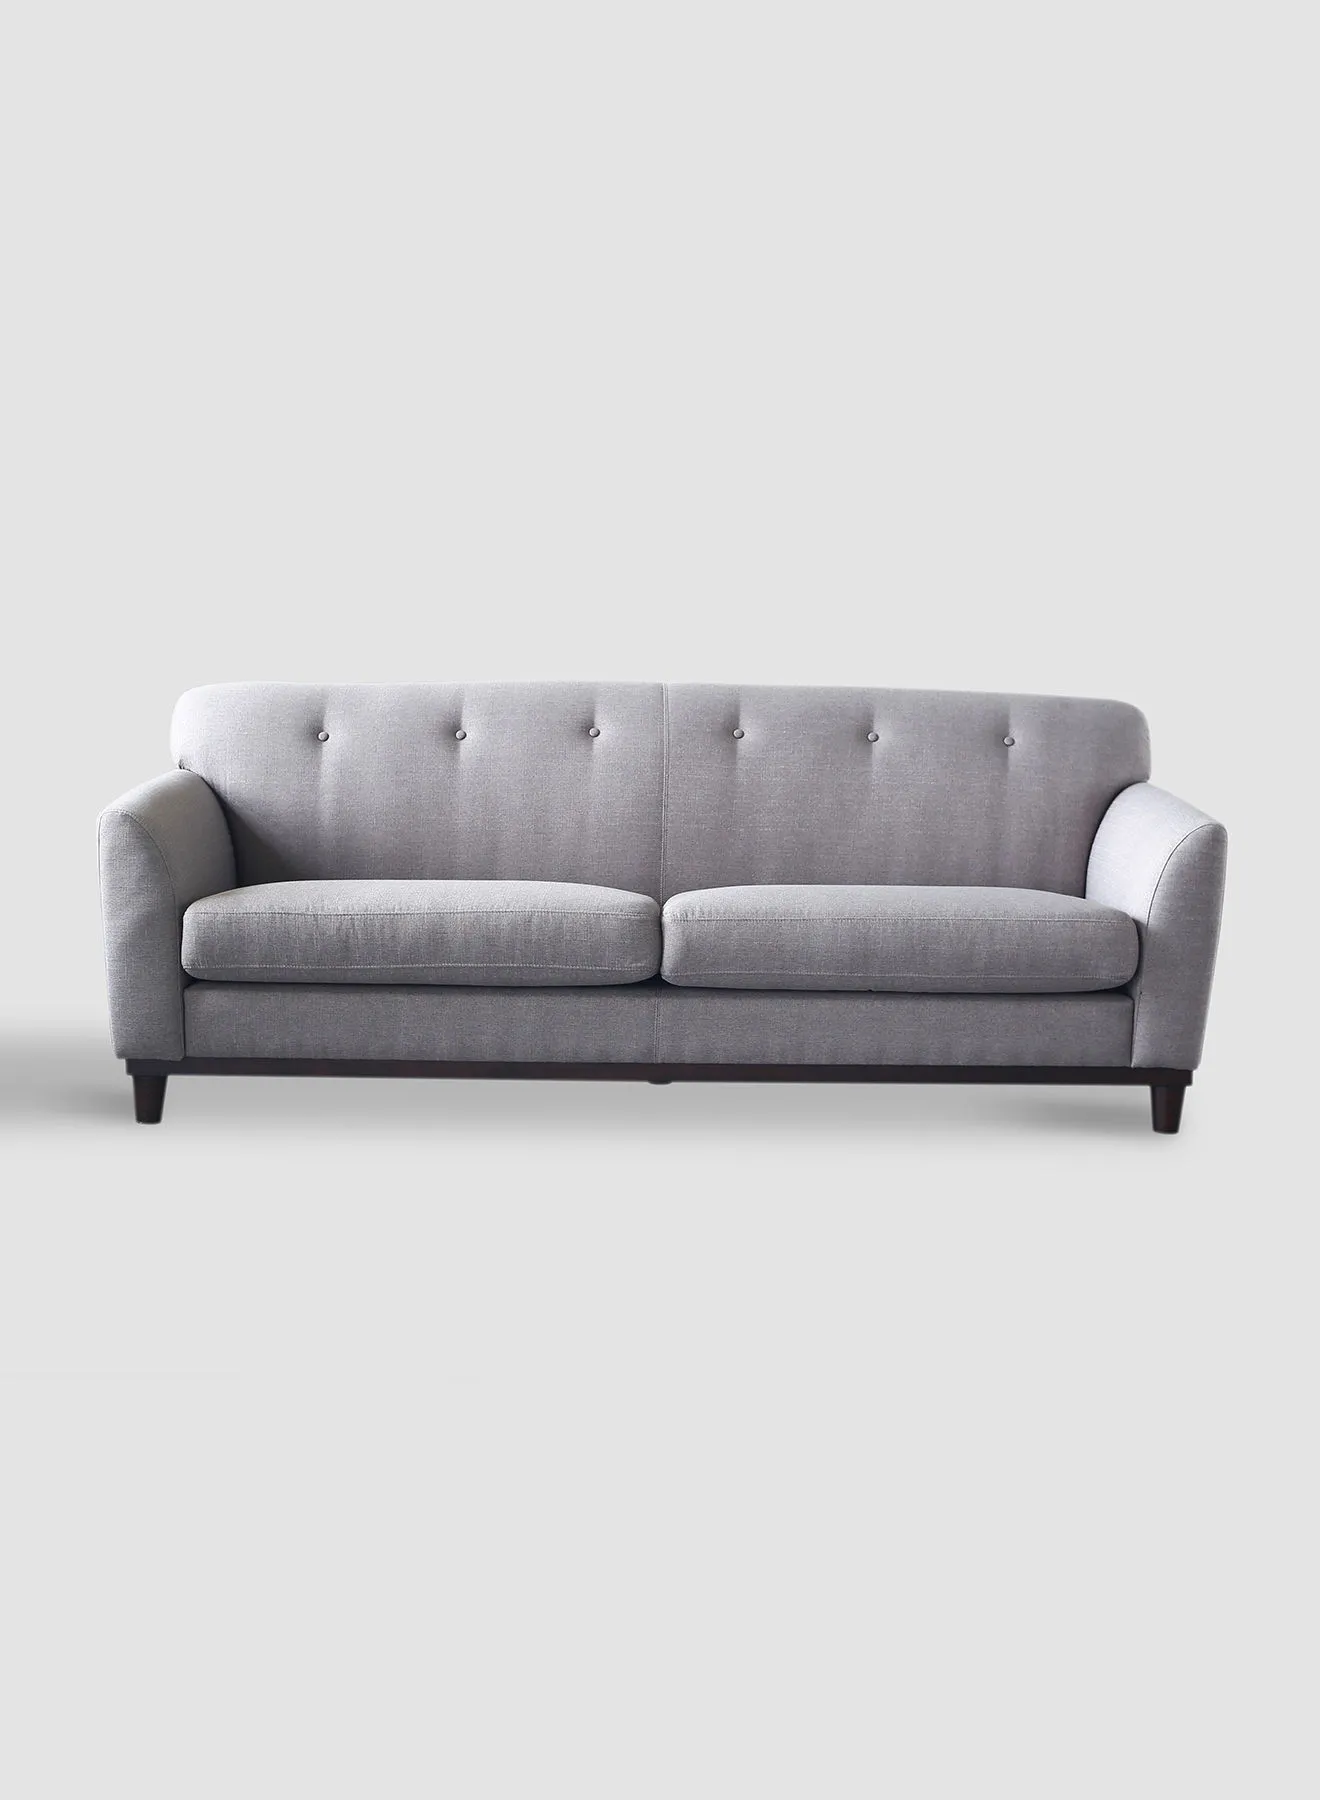 Switch Sofa - Grey Couch - 2180 X 940 X 790 - 3 Seater Sofa Relaxing Sofa